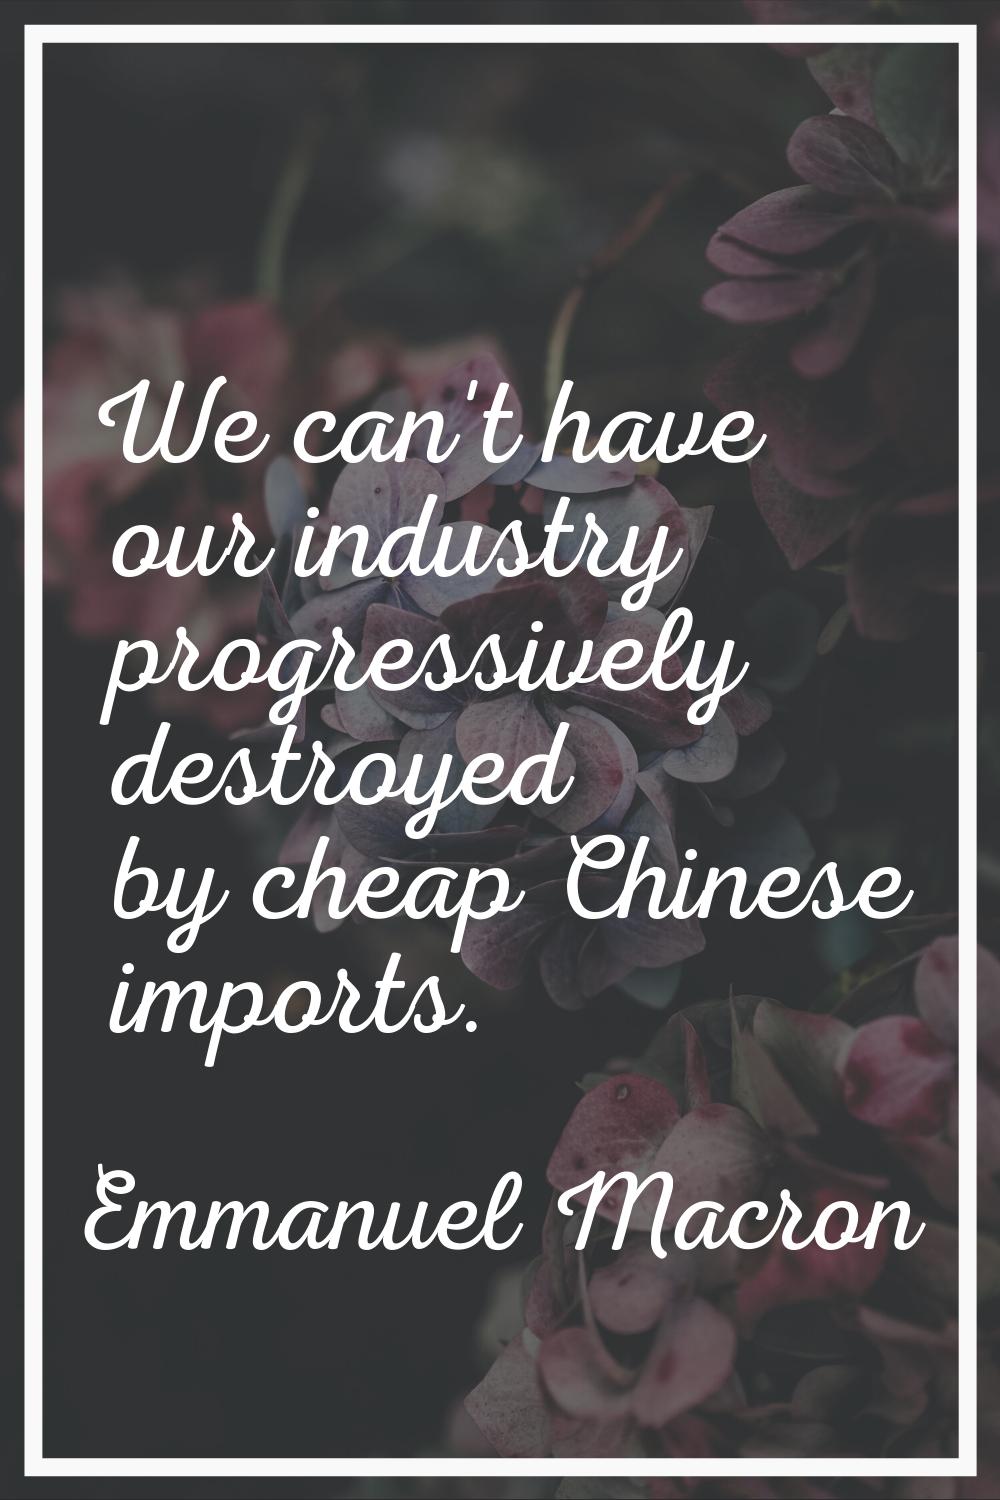 We can't have our industry progressively destroyed by cheap Chinese imports.